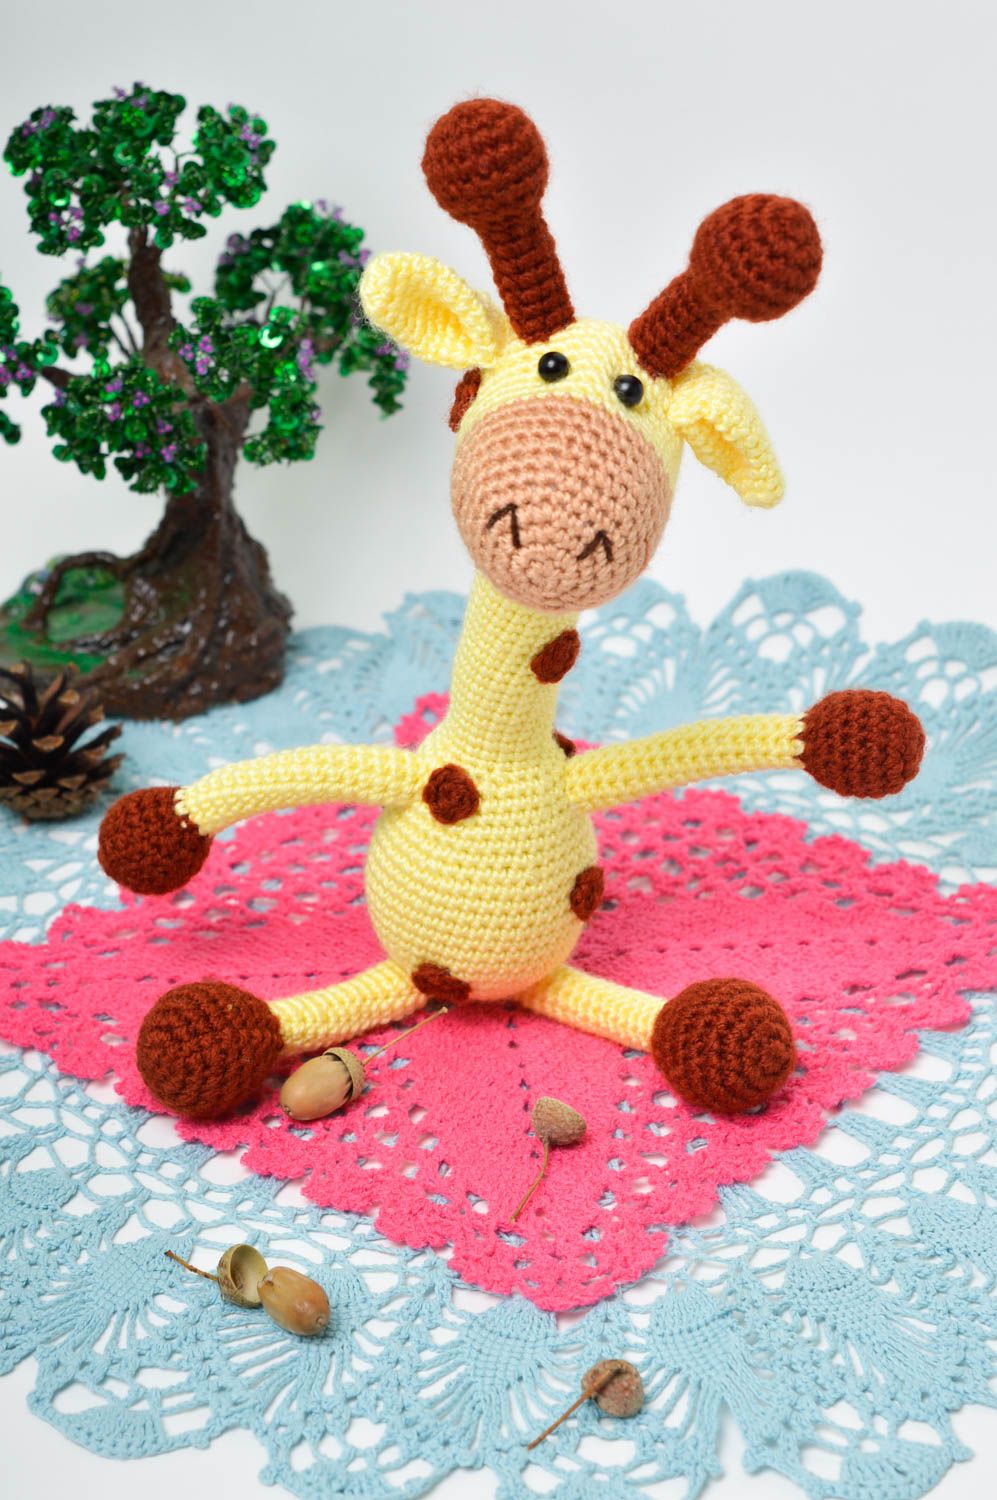 Handmade stylish interior toy unusual knitted soft toy textile collection toy photo 1